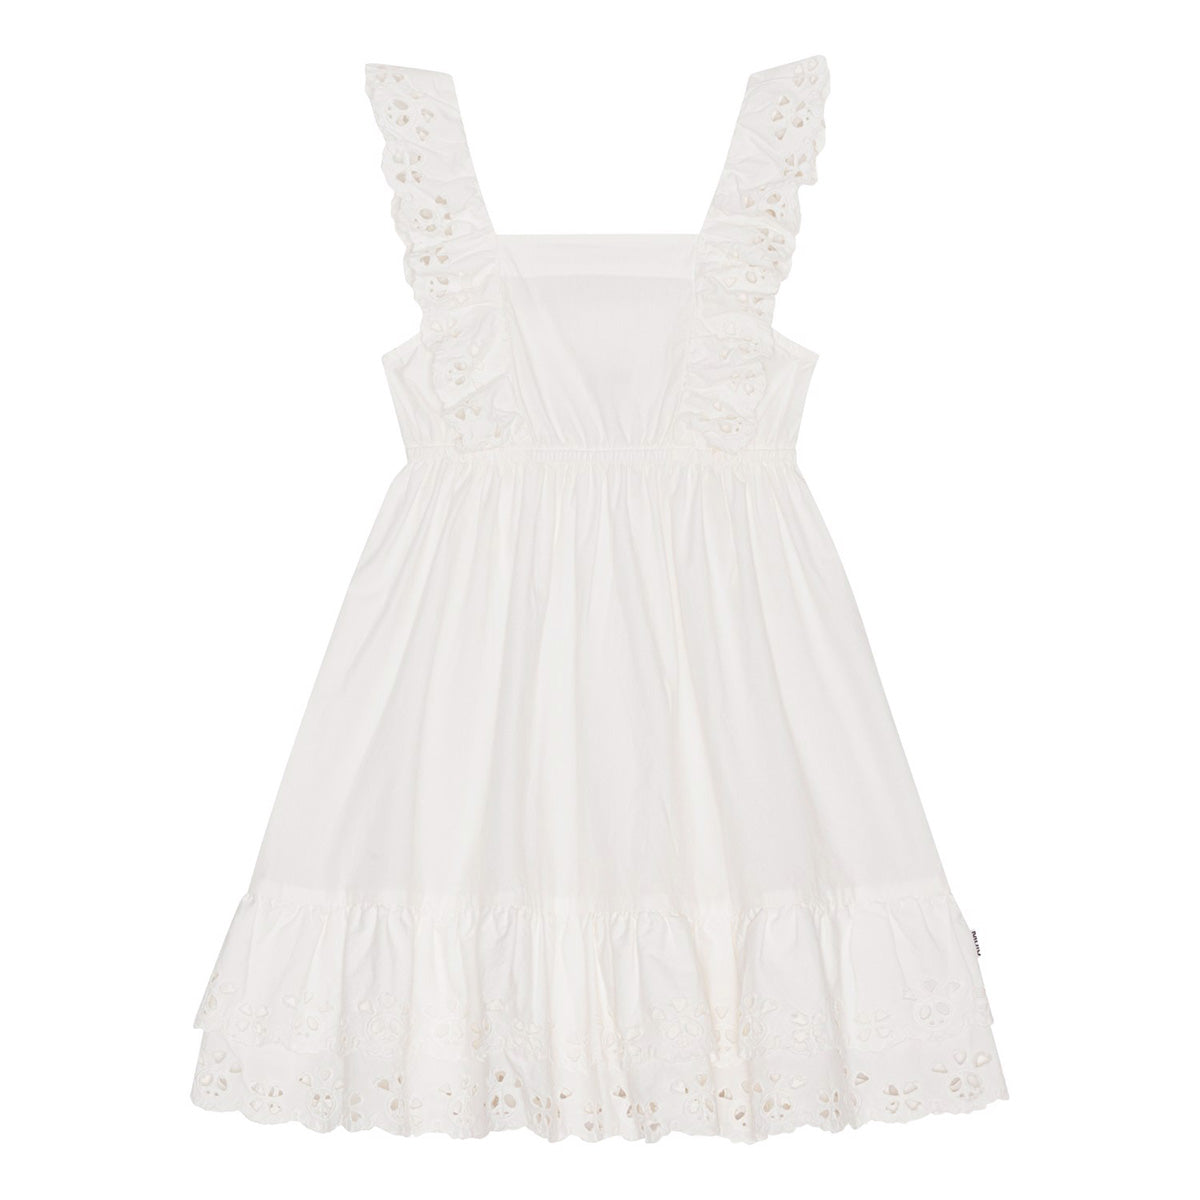 The Ceelos Dress from Molo. Knee length, white dress in organic cotton